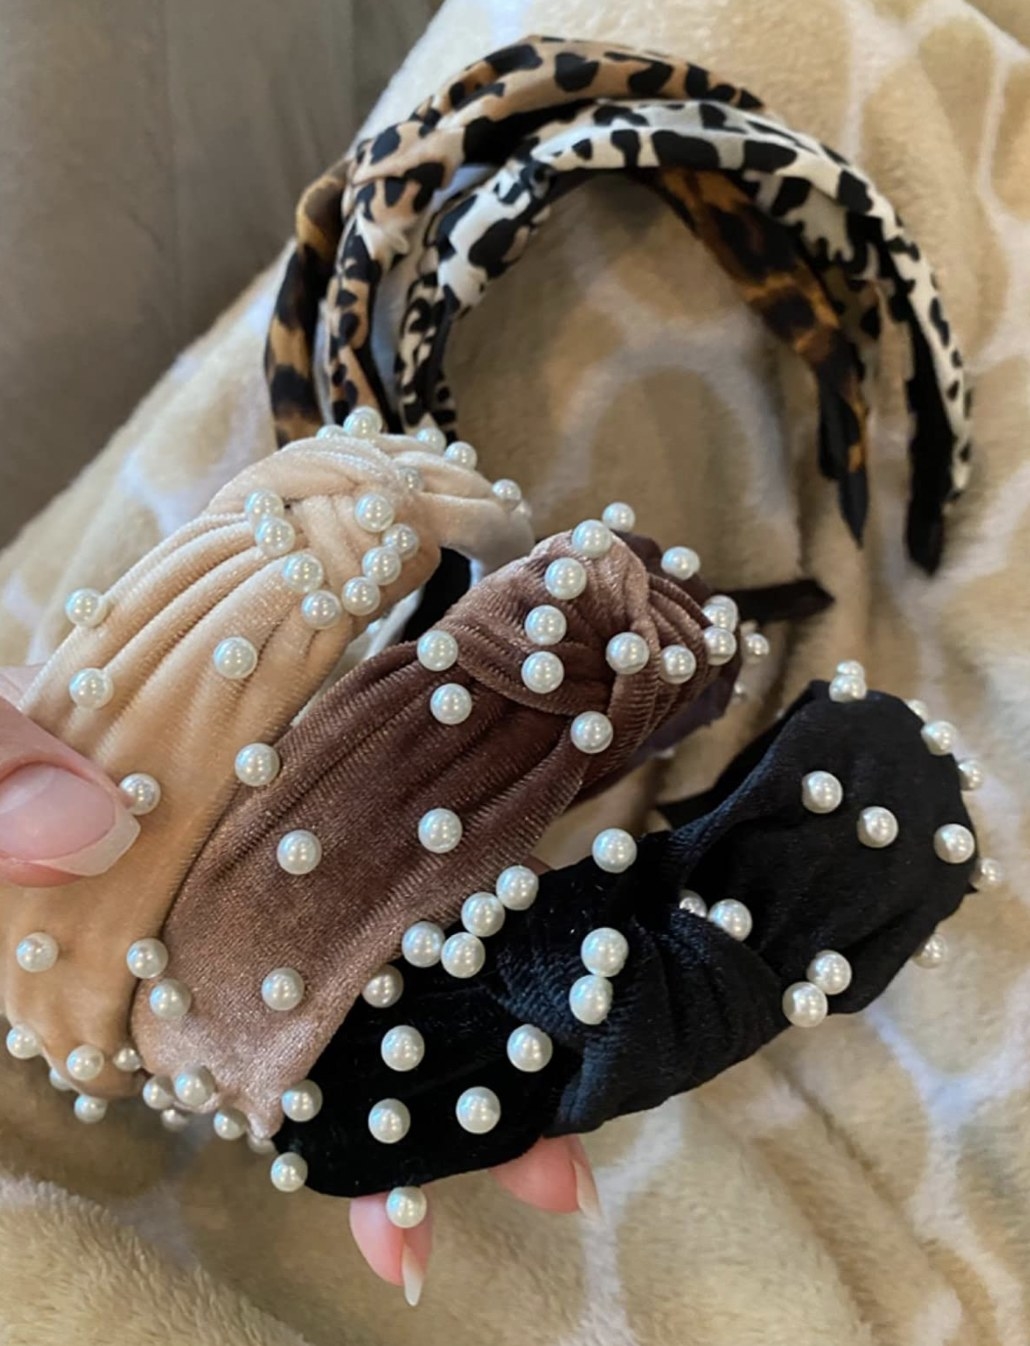 all six headbands in varying designs with pearls and animal print